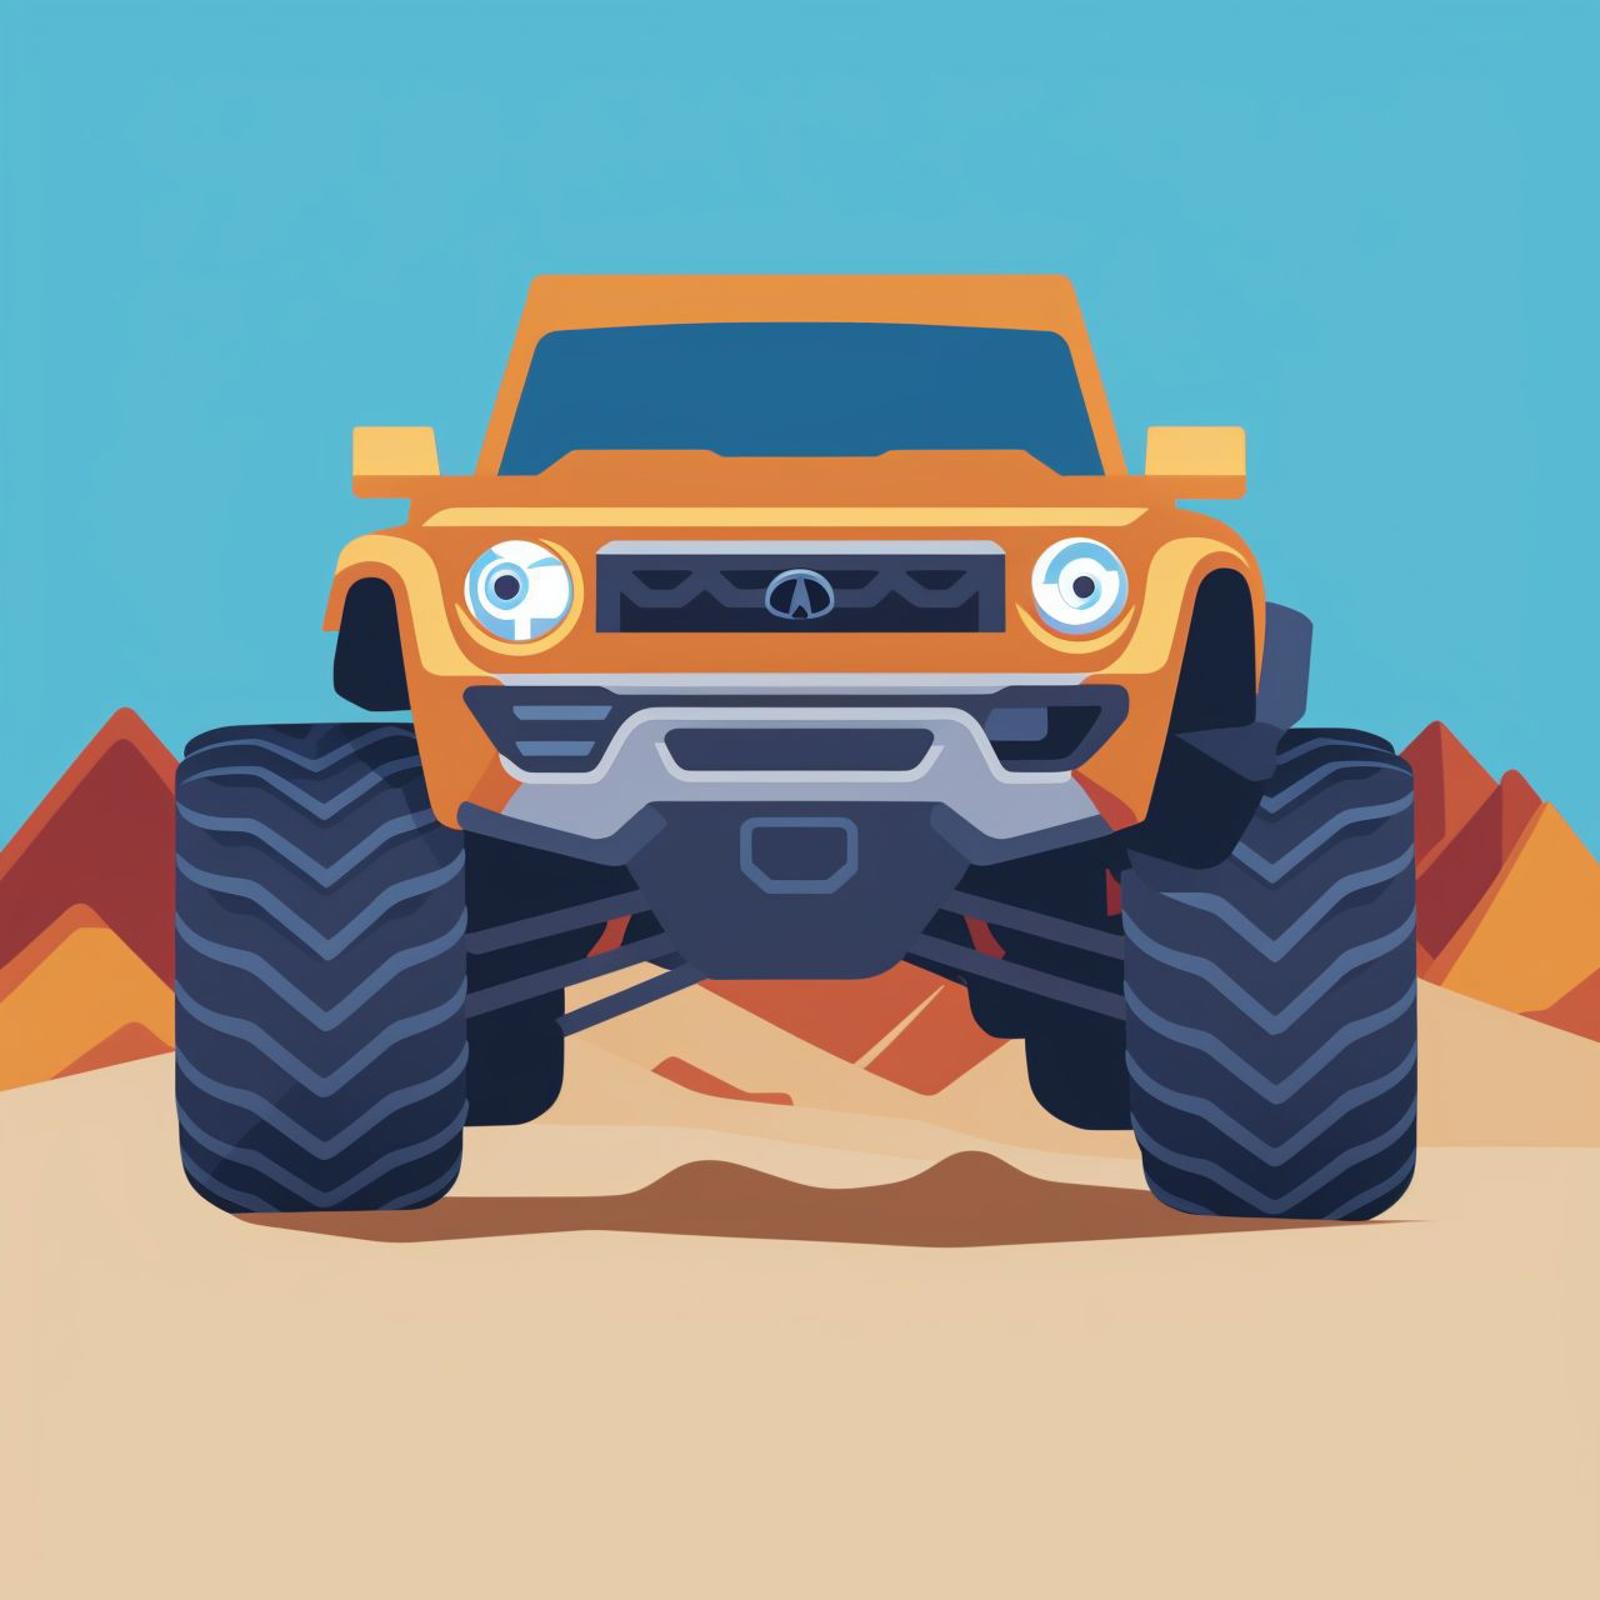 A large orange truck with big tires driving in a desert.